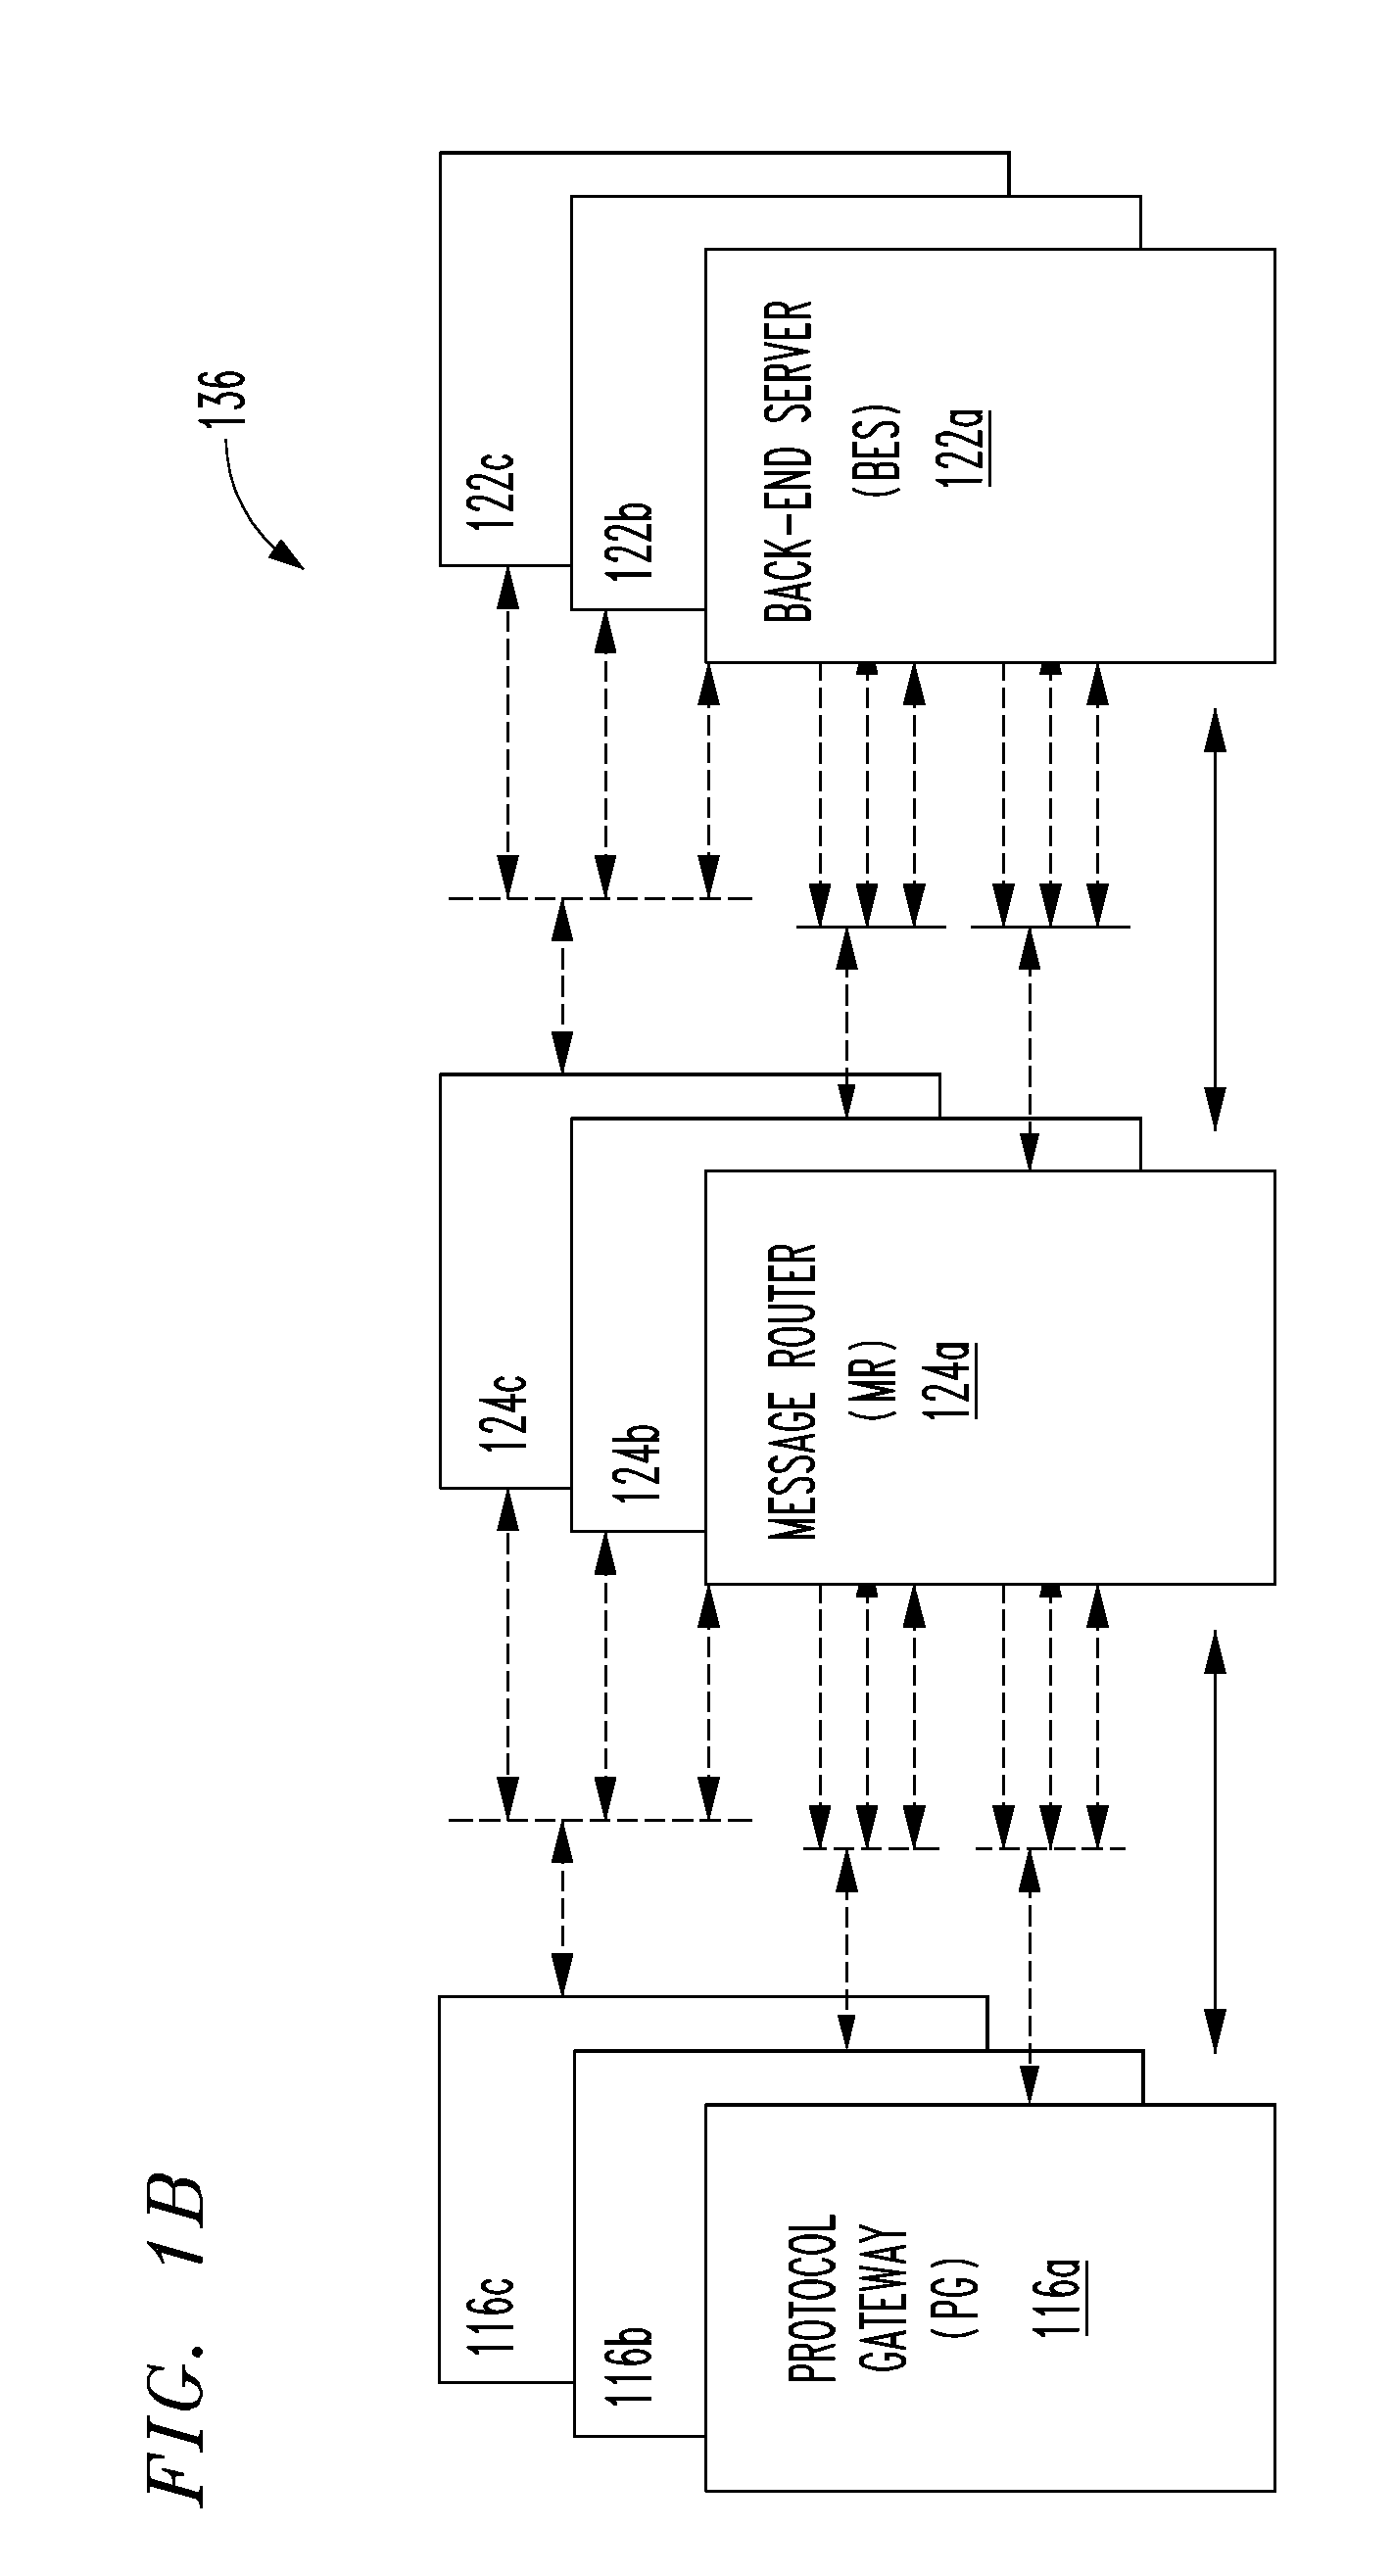 System and Method for Servers to Send Alerts to Connectionless Devices